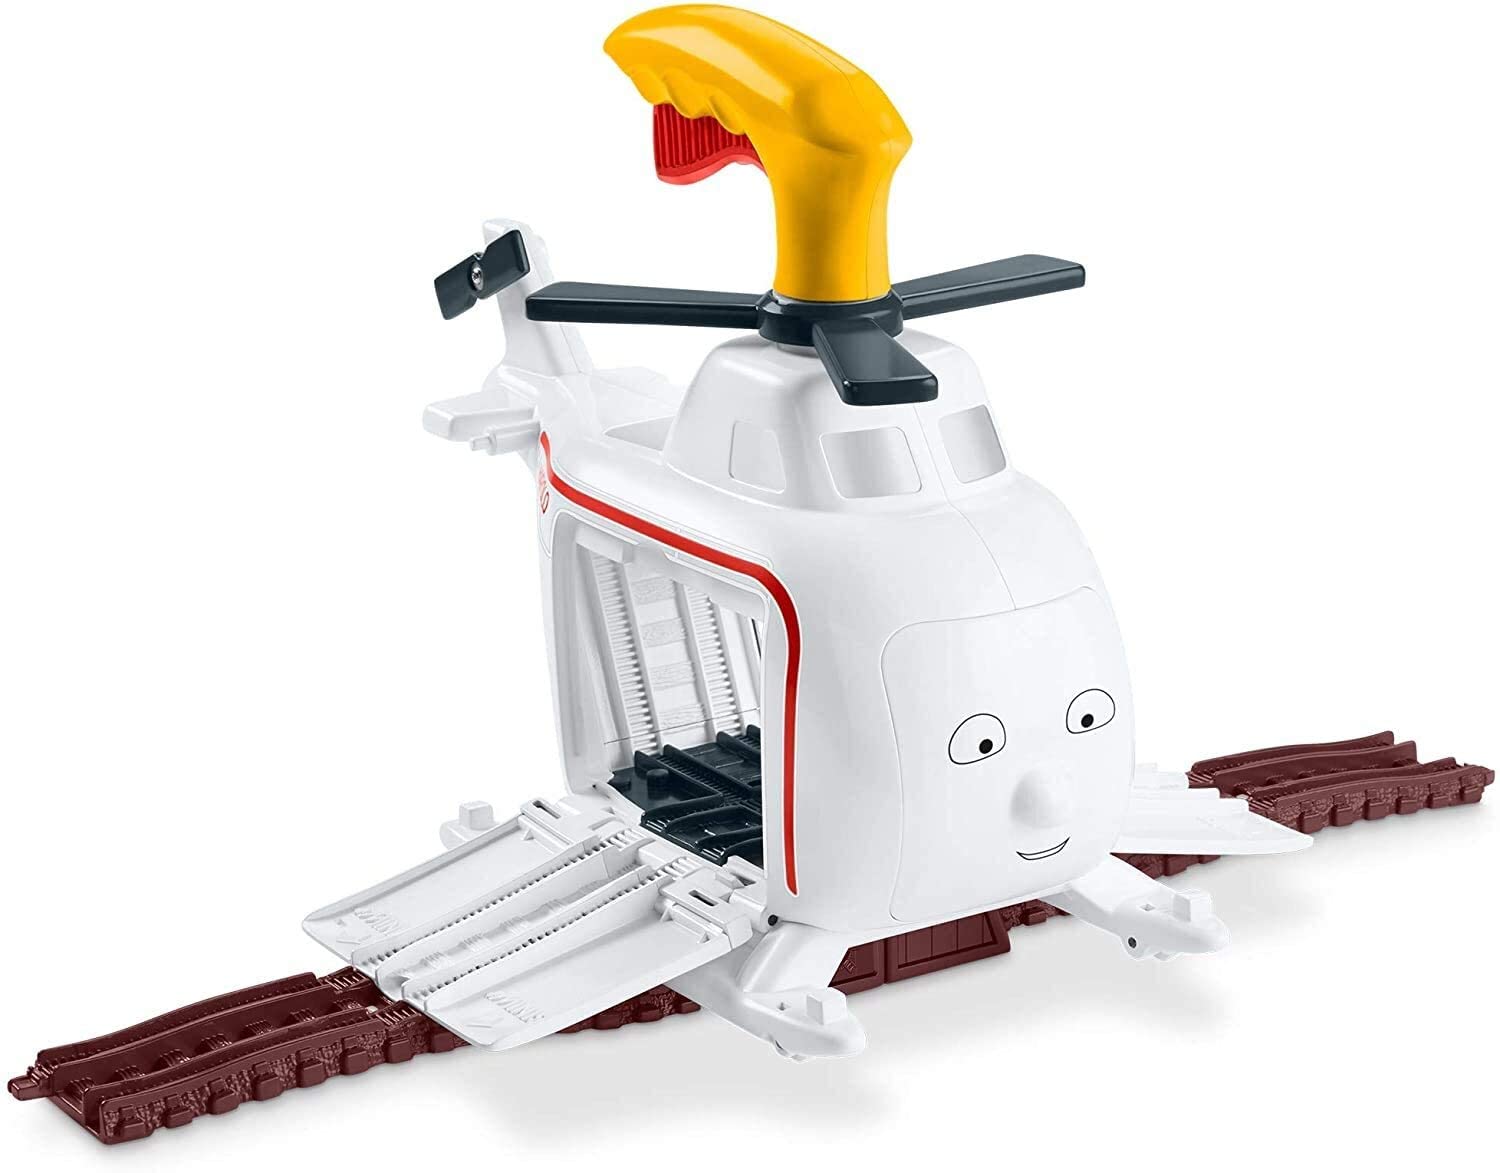 Thomas & Friends Press 'n Spin Harold $9.50 + Free Shipping w/ Amazon Prime or Orders $25+